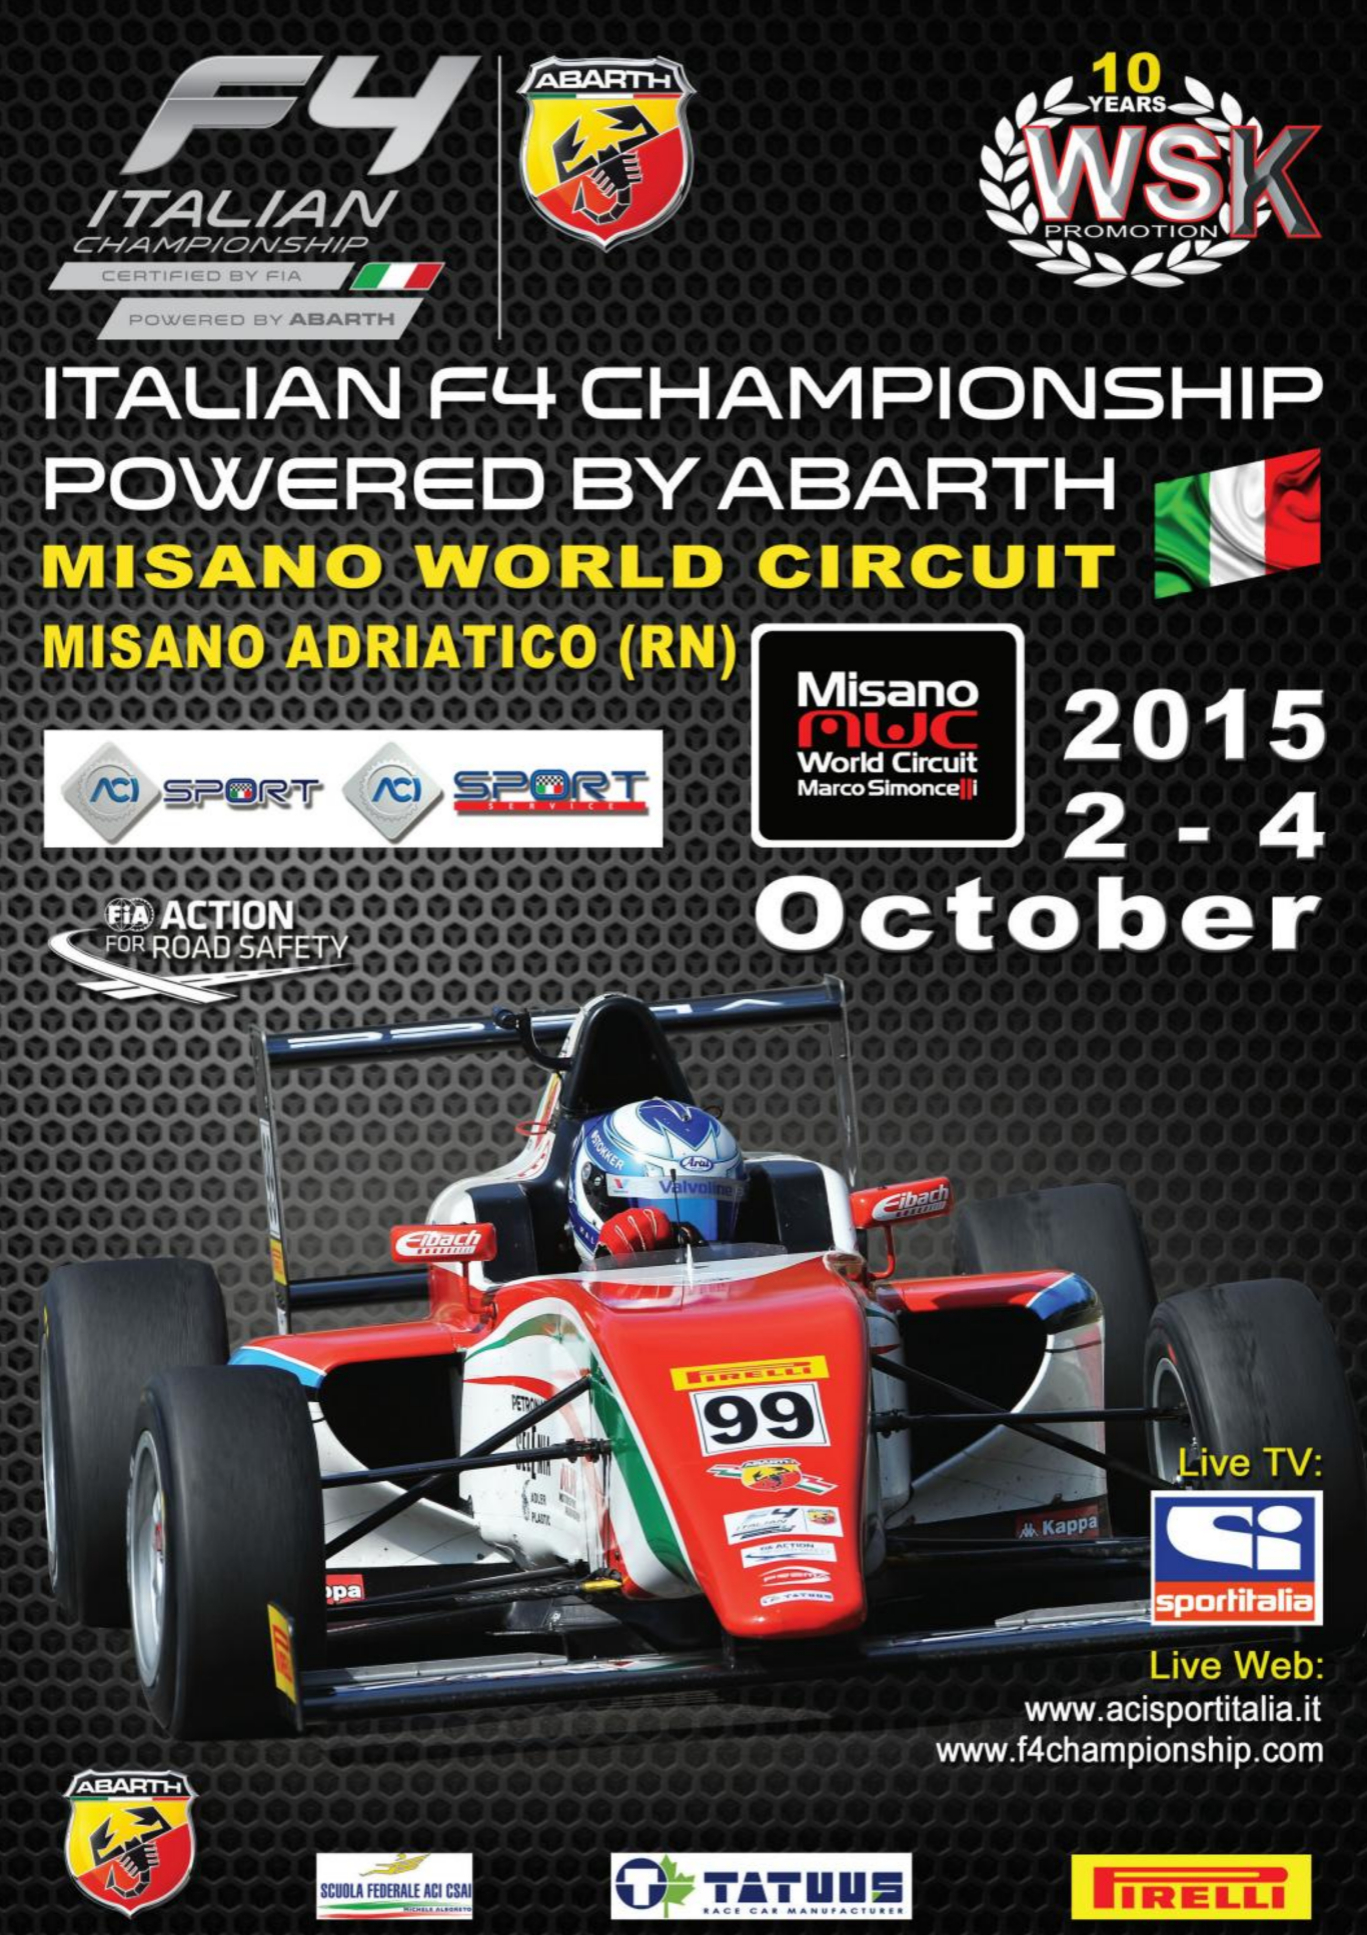 Misano World Circuit | The Motor Racing Programme Covers Project